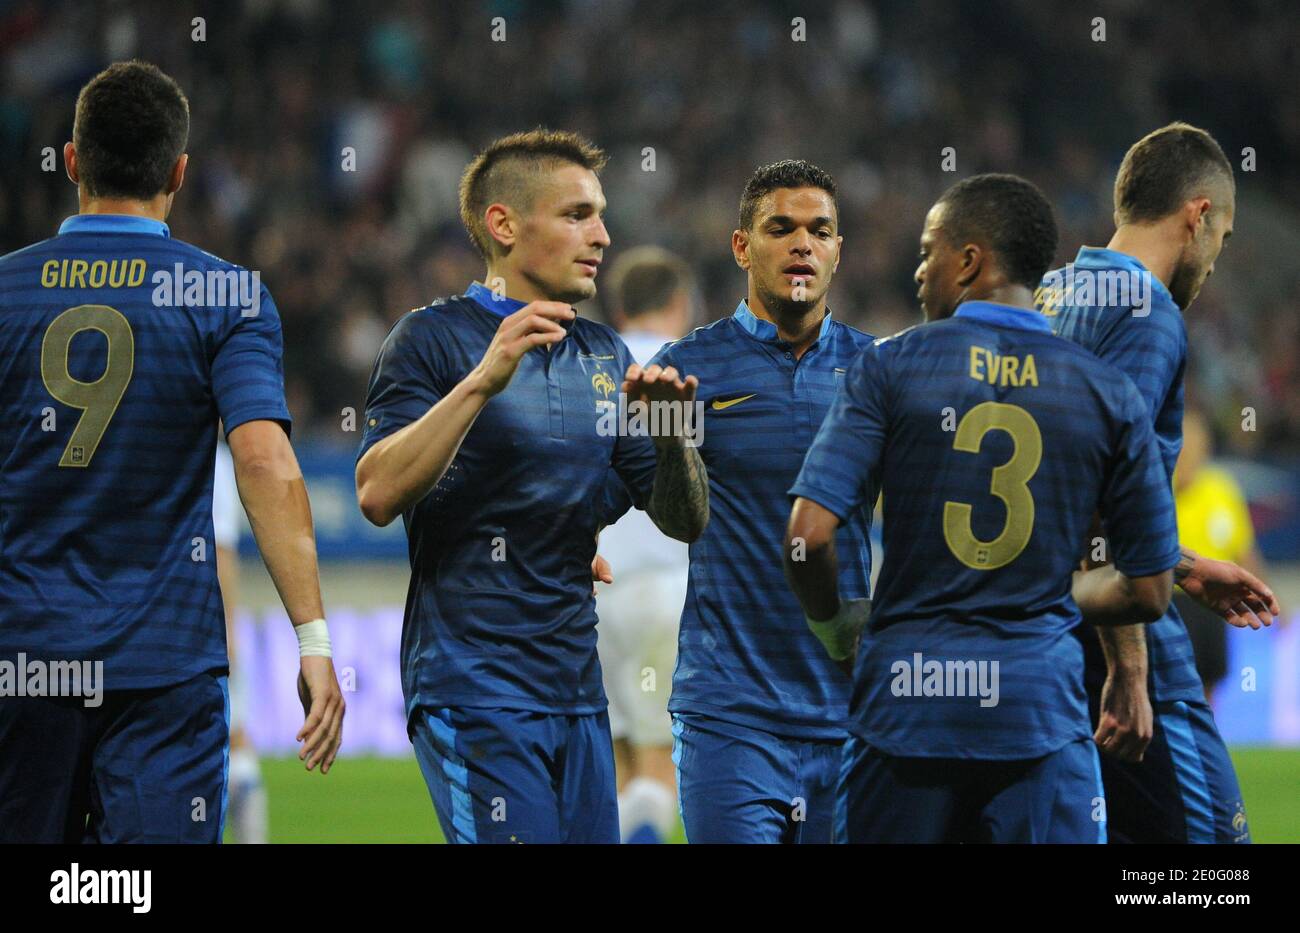 France's during an International Friendly soccer match, France Vs Estonia at MMArena stadium in Le Mans, France, on June 5, 2012. France won 4-0. Photo by ABACAPRESS.COM Stock Photo